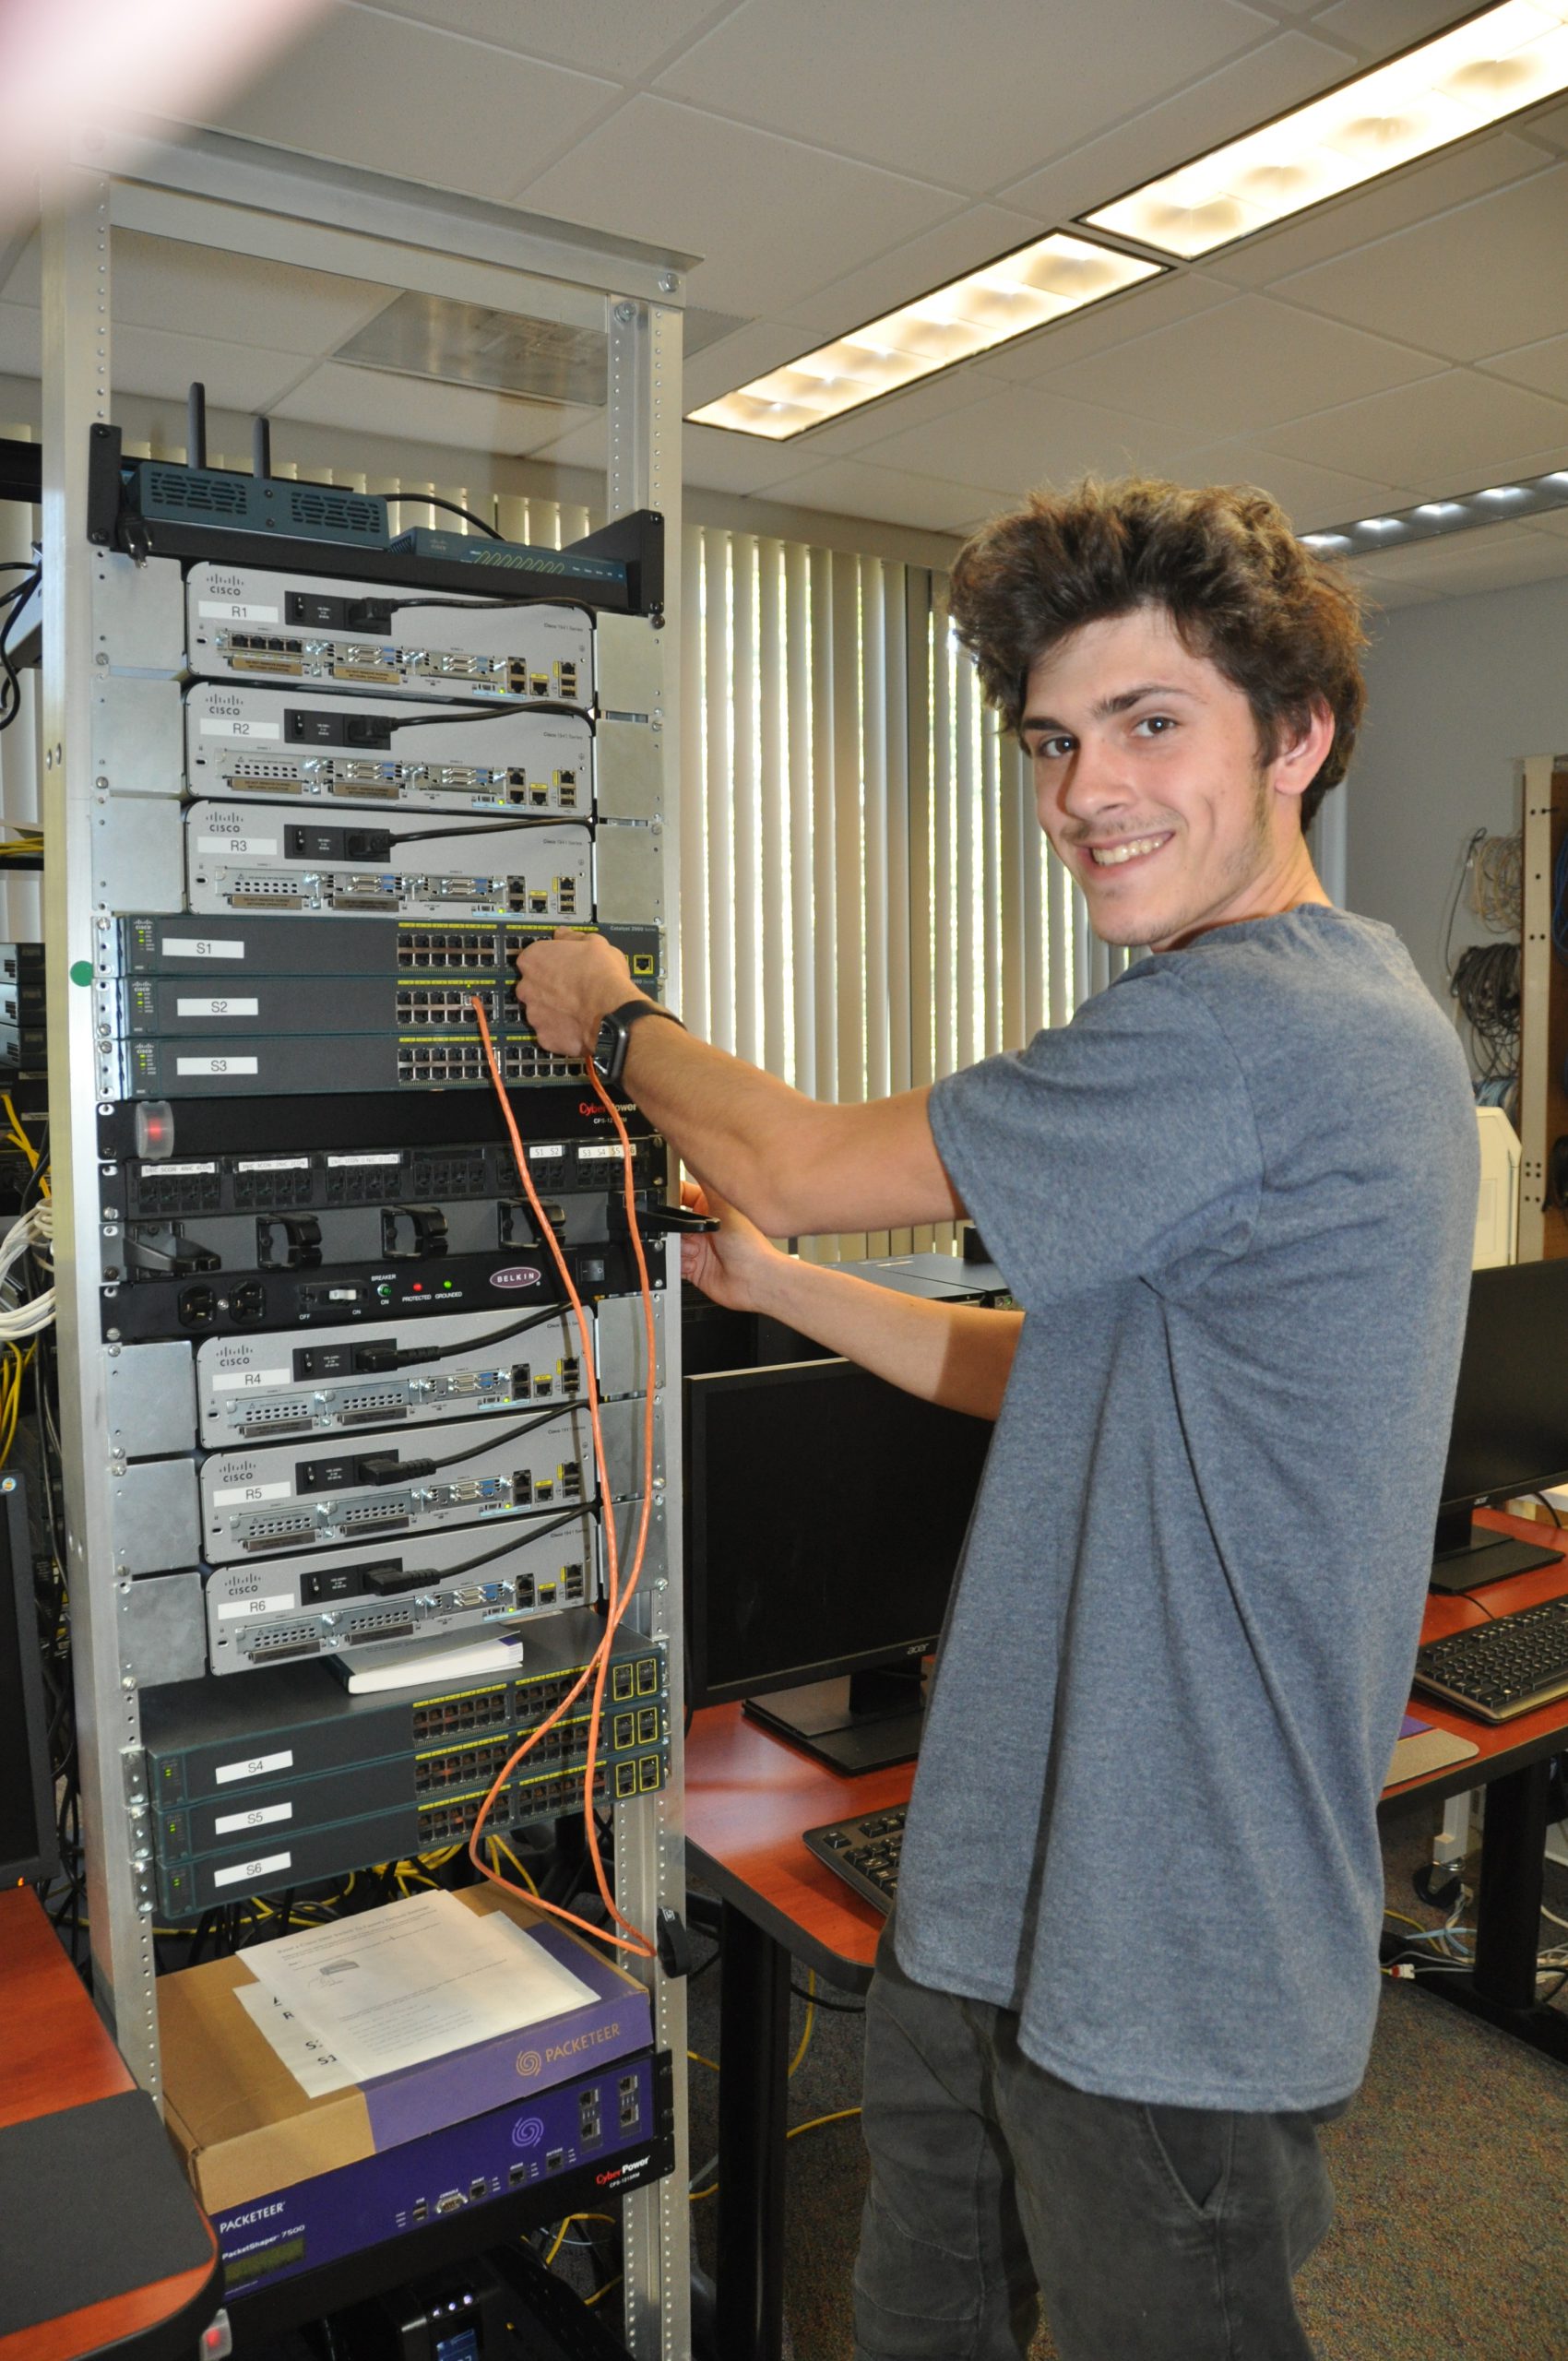 Student next to switches